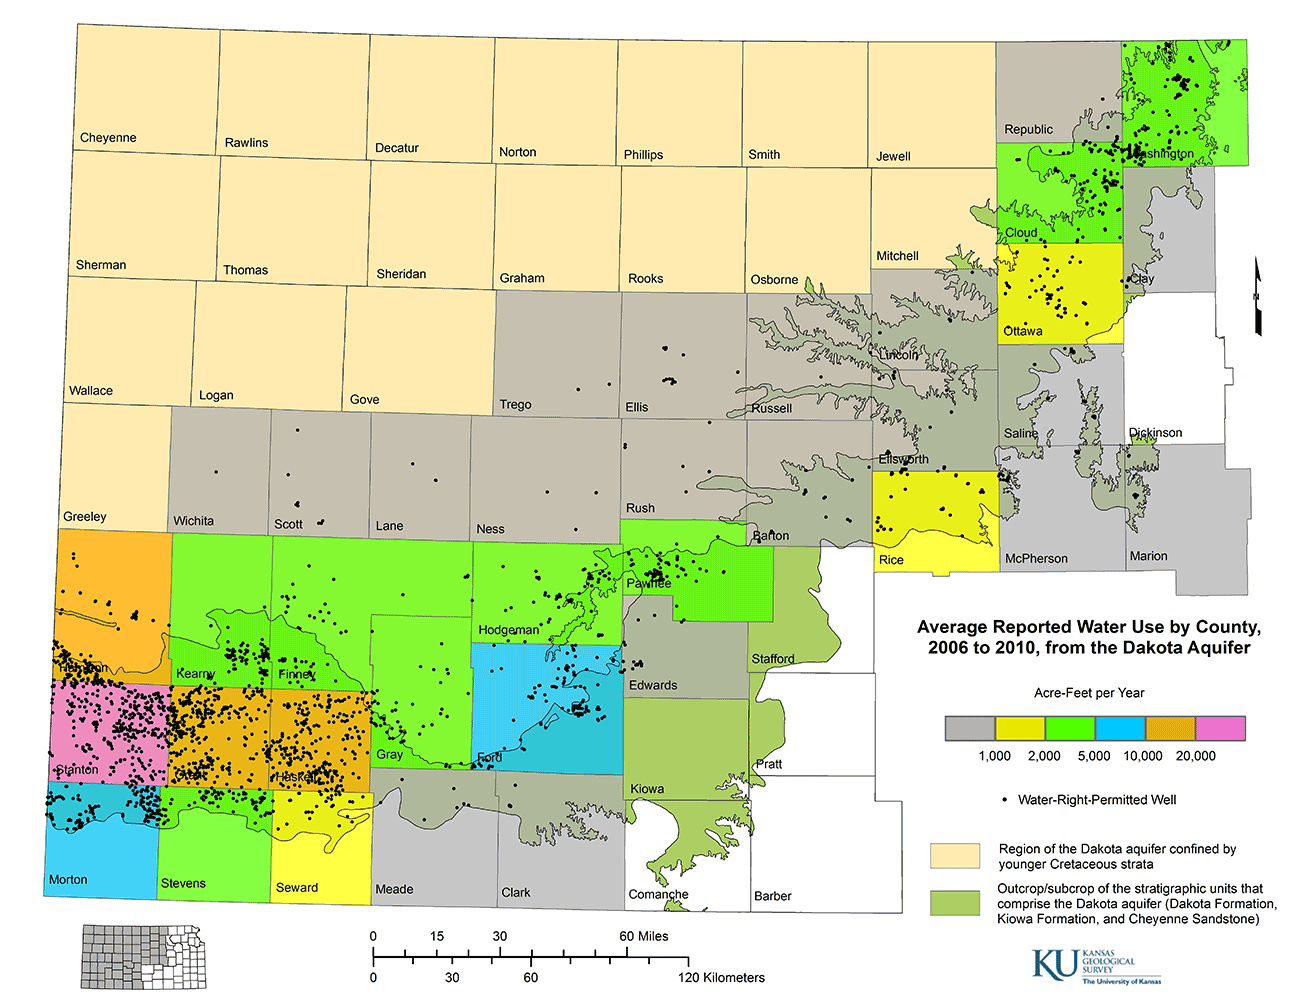 Estimated average annual use of groundwater from the Dakota aquifer by counties.